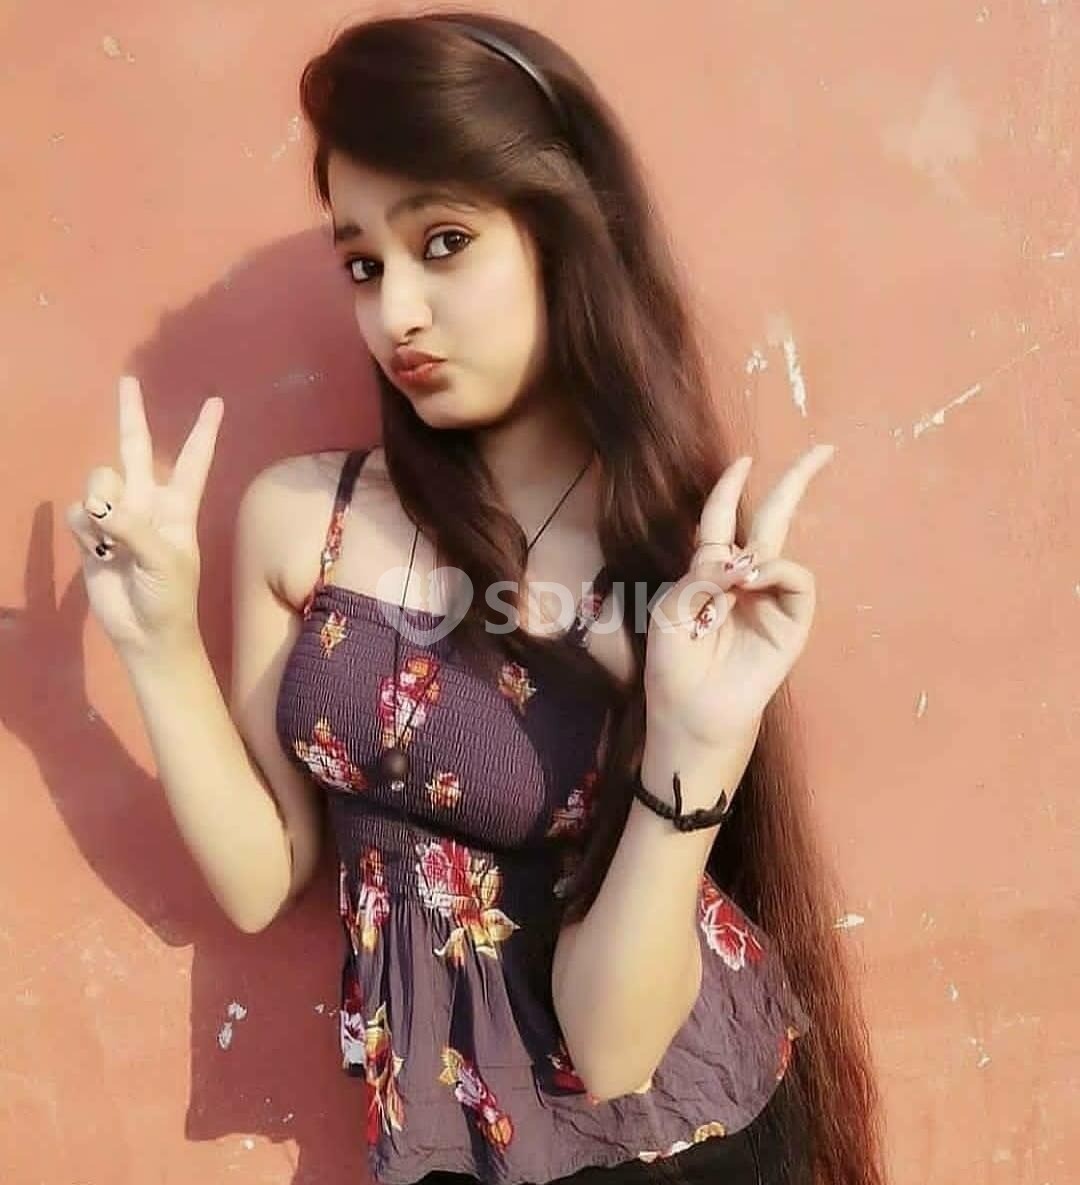 Guwahati LOW PRICE🔸k ✅ m( 24×7 ) SERVICE A AVAILABLE 100% SAFE AND S SECURE UNLIMITED ENJOY HOT COLLEGE GIRL HOUSE